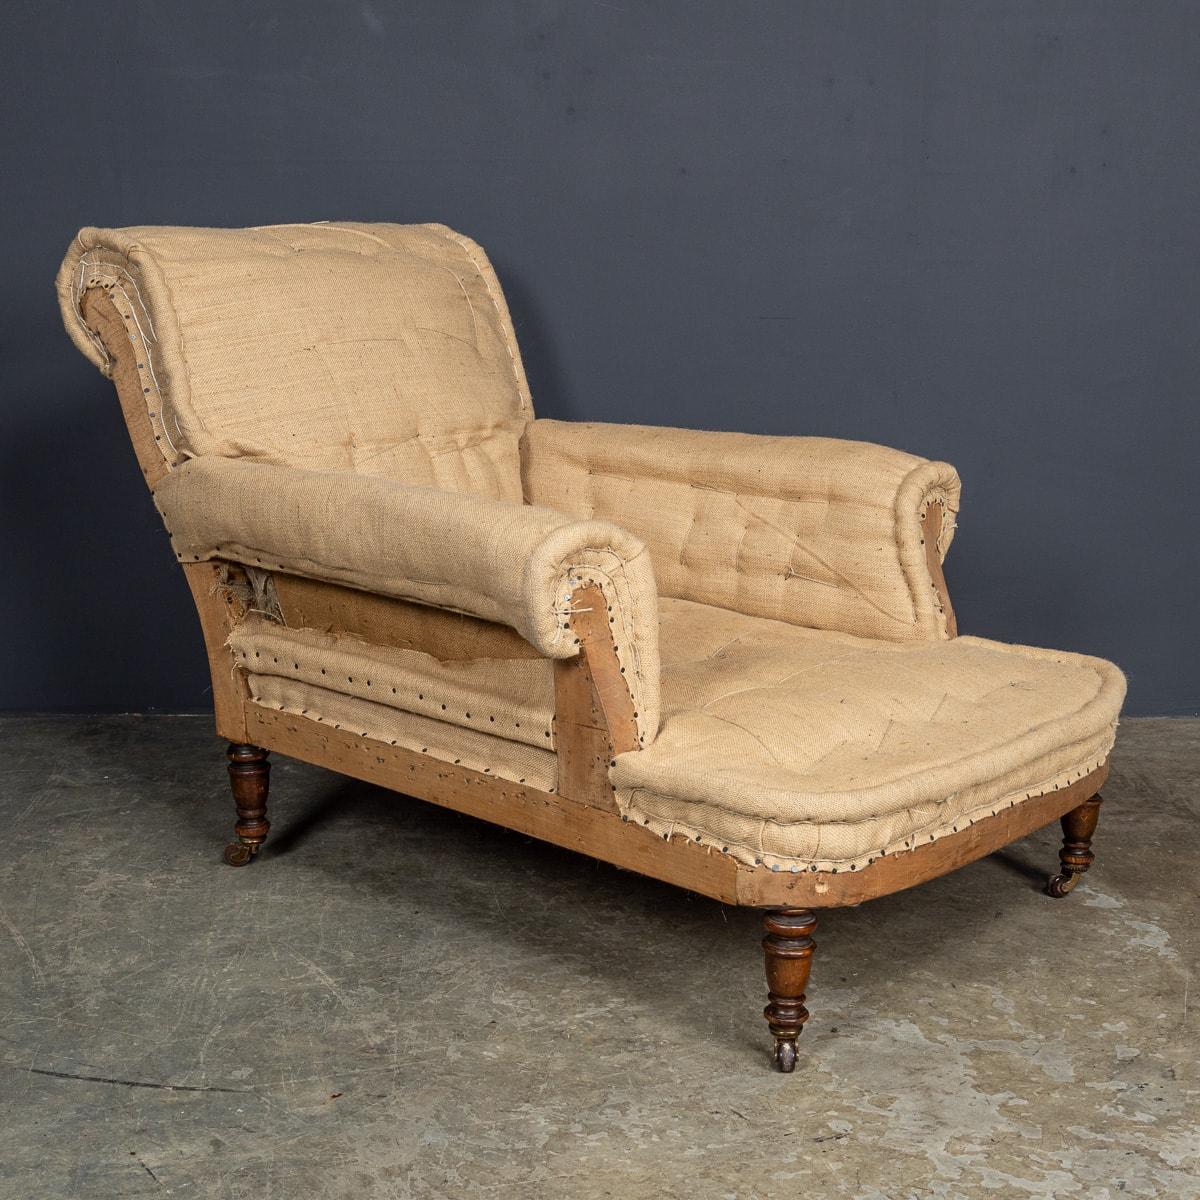 A beautifully proportioned Victorian chaise lounge from the 19th Century, offering a touch of elegance to any space. Left in a natural hessian finish, it awaits your choice of fabric or can be appreciated as is. Featuring a curved arm and